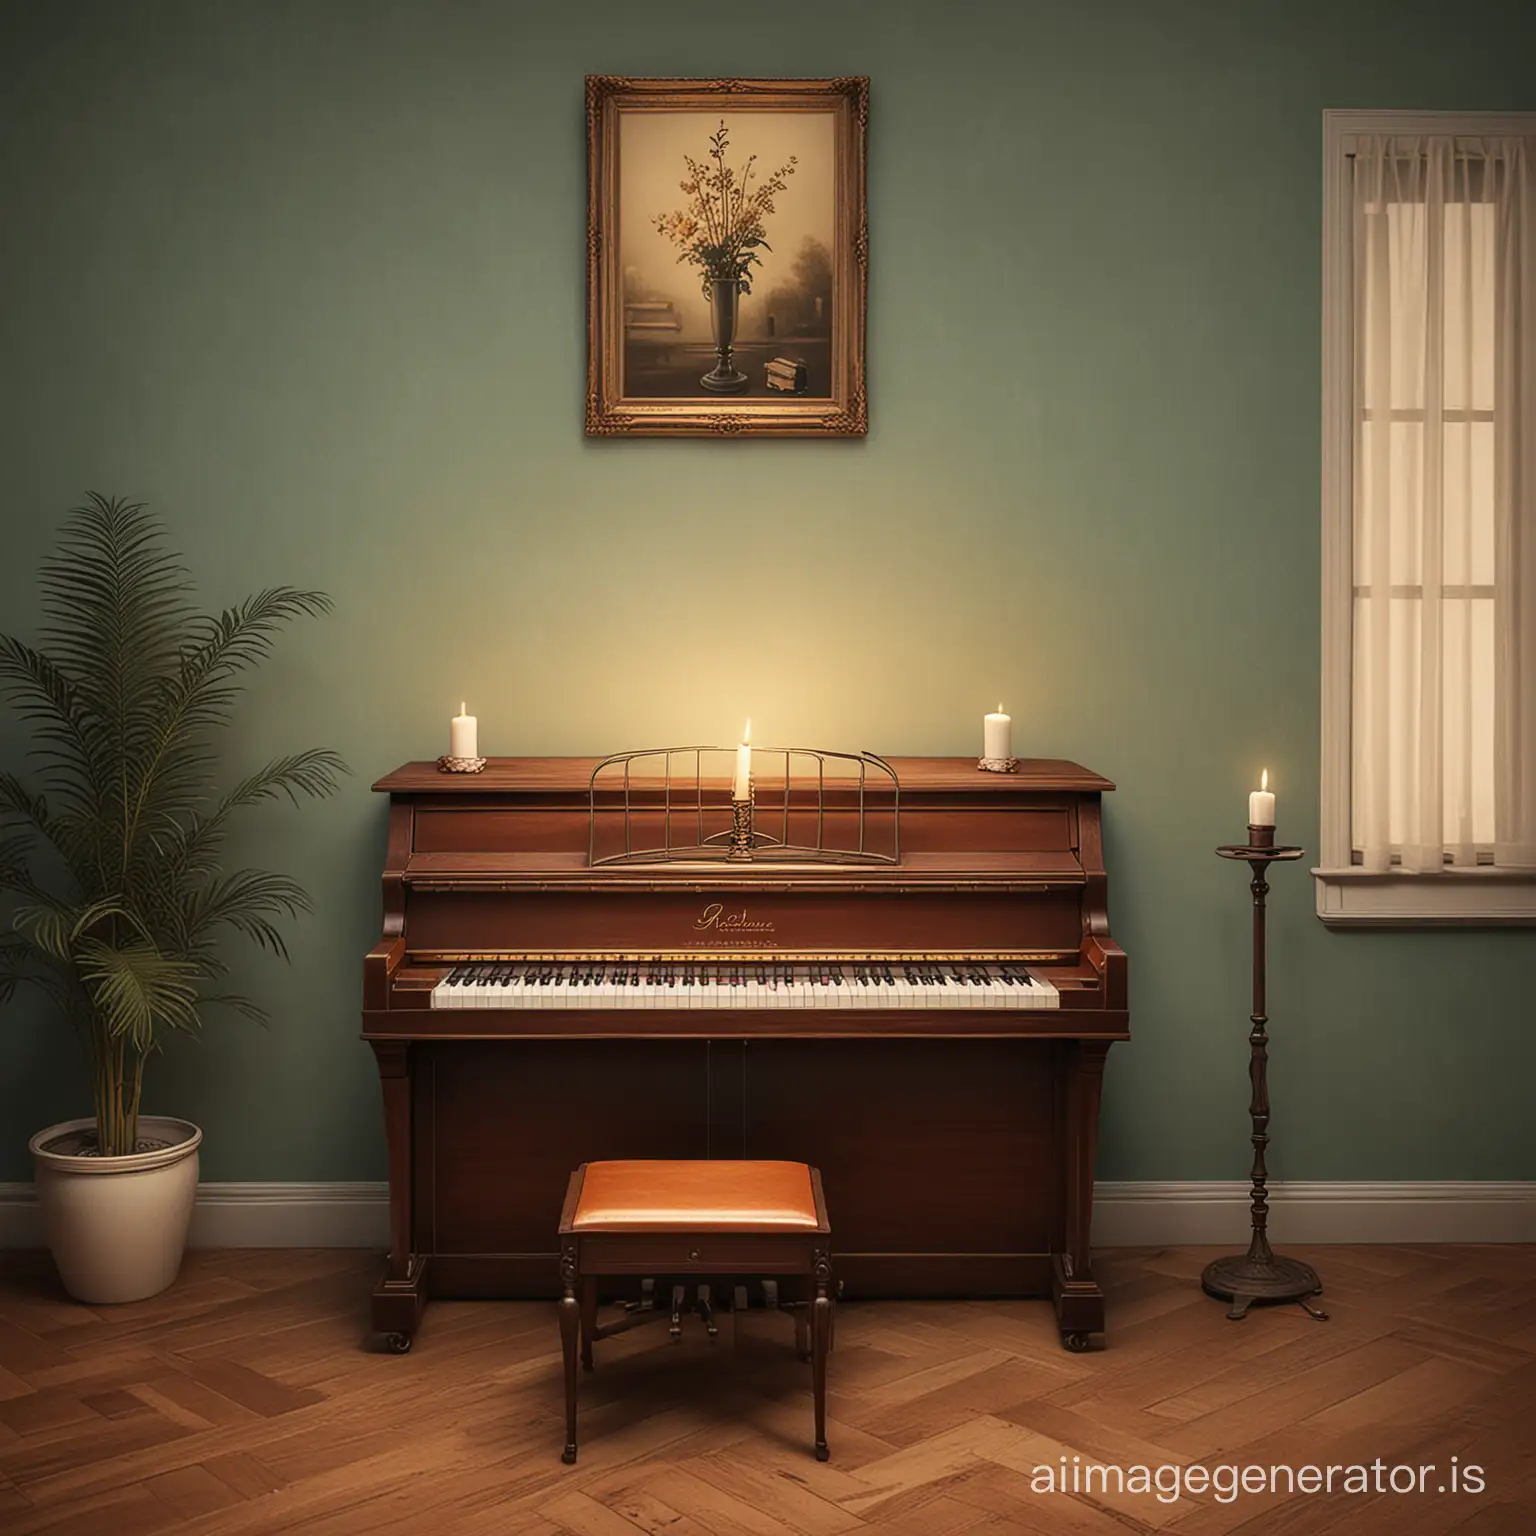 Vintage-1920s-Piano-in-Whimsical-Empty-Room